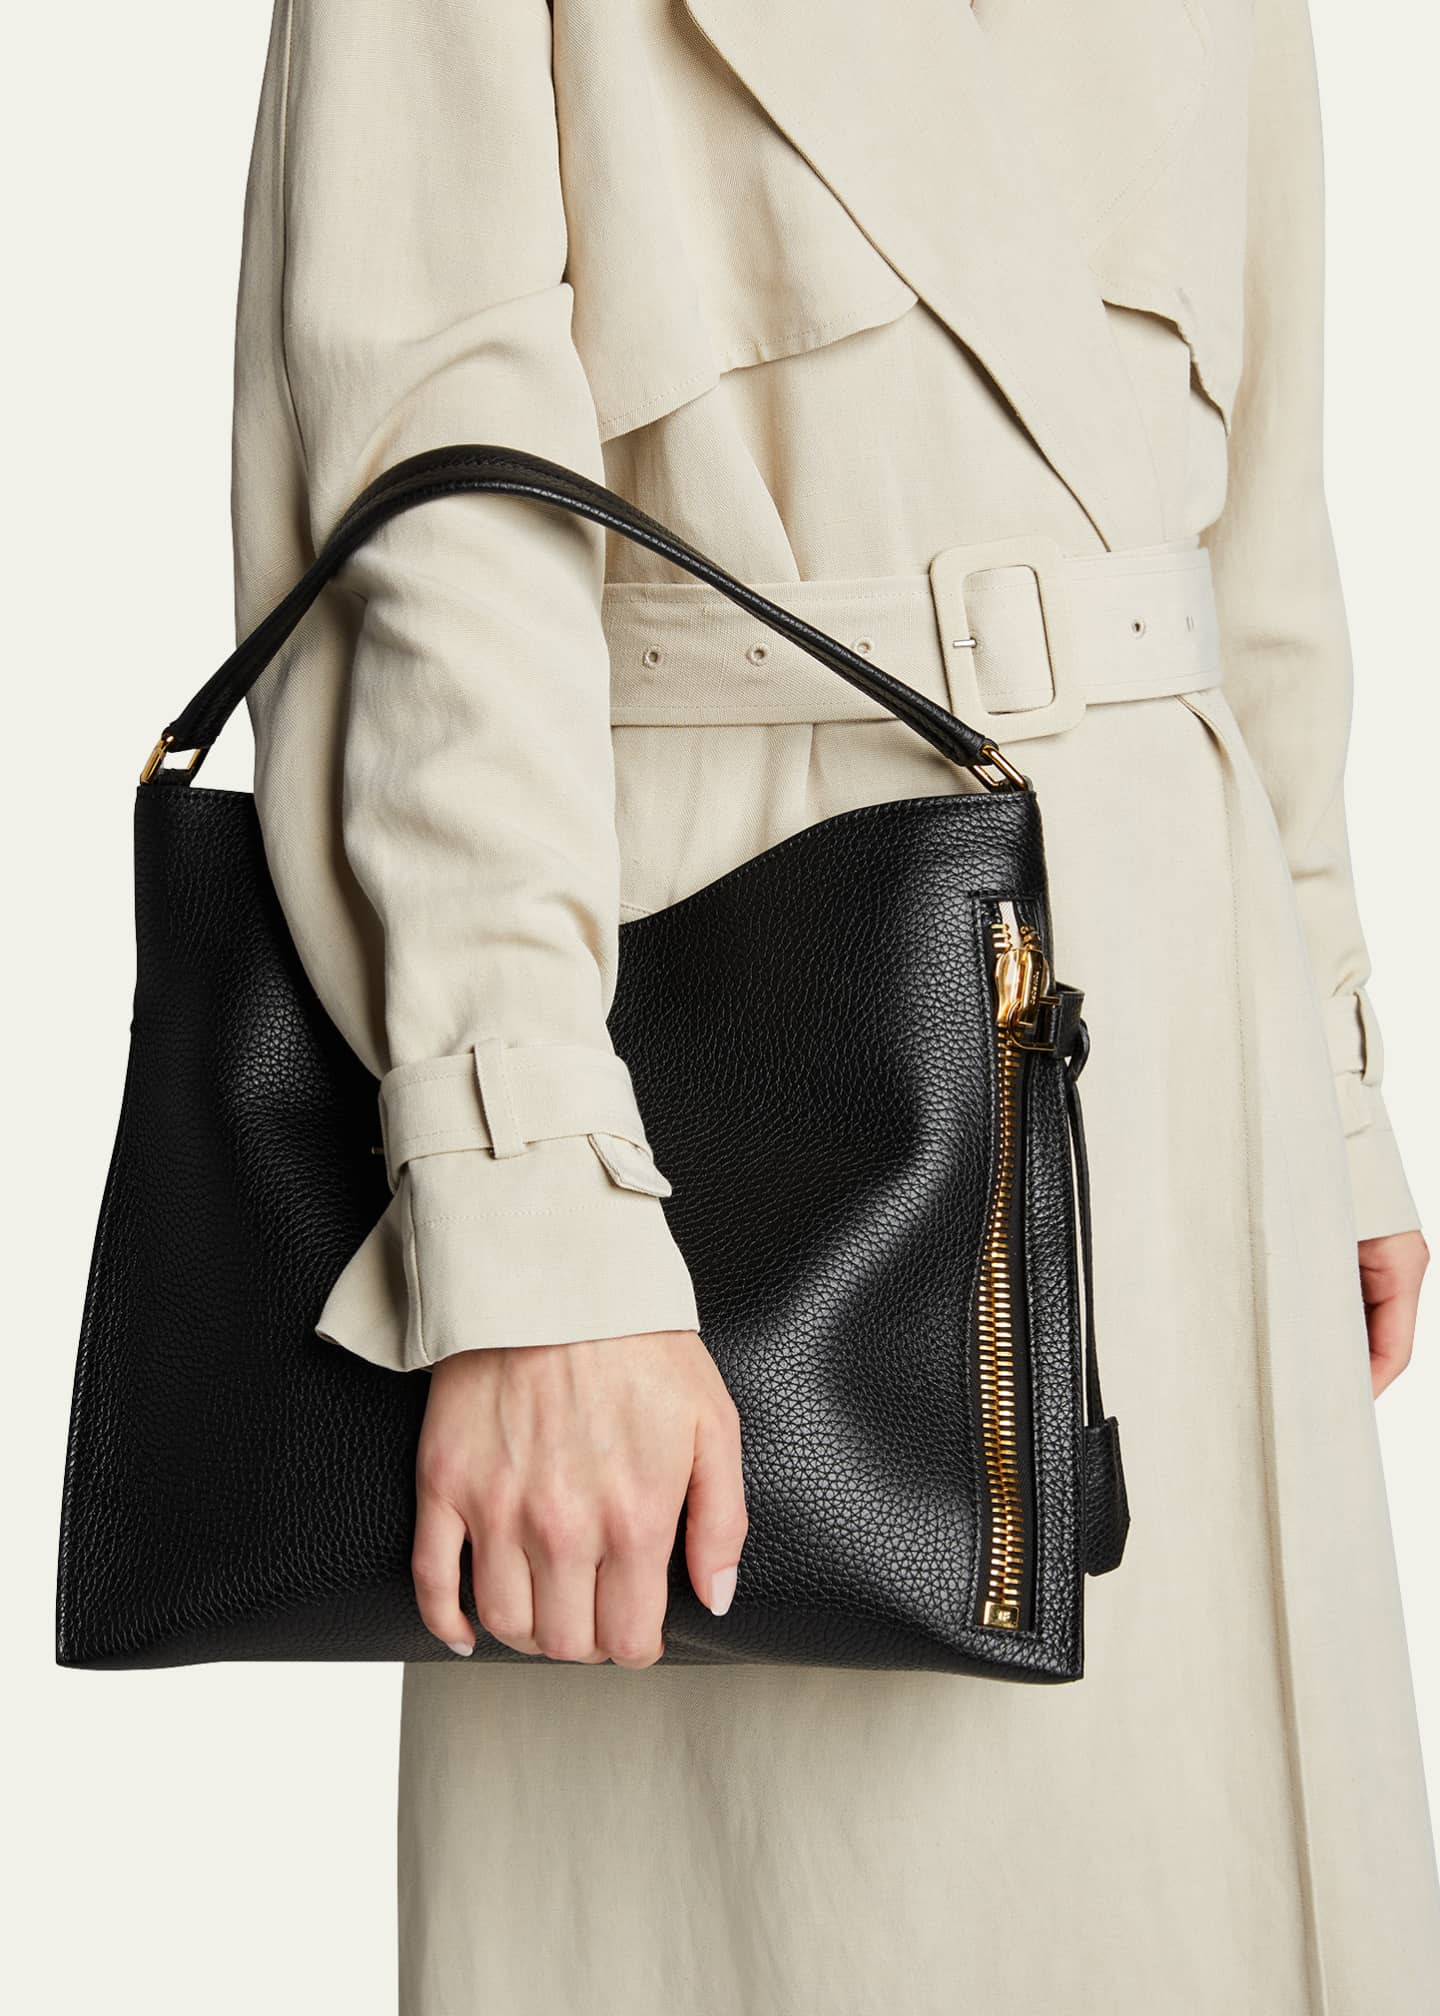 TOM FORD Alix Hobo Small in Grained Leather - Bergdorf Goodman